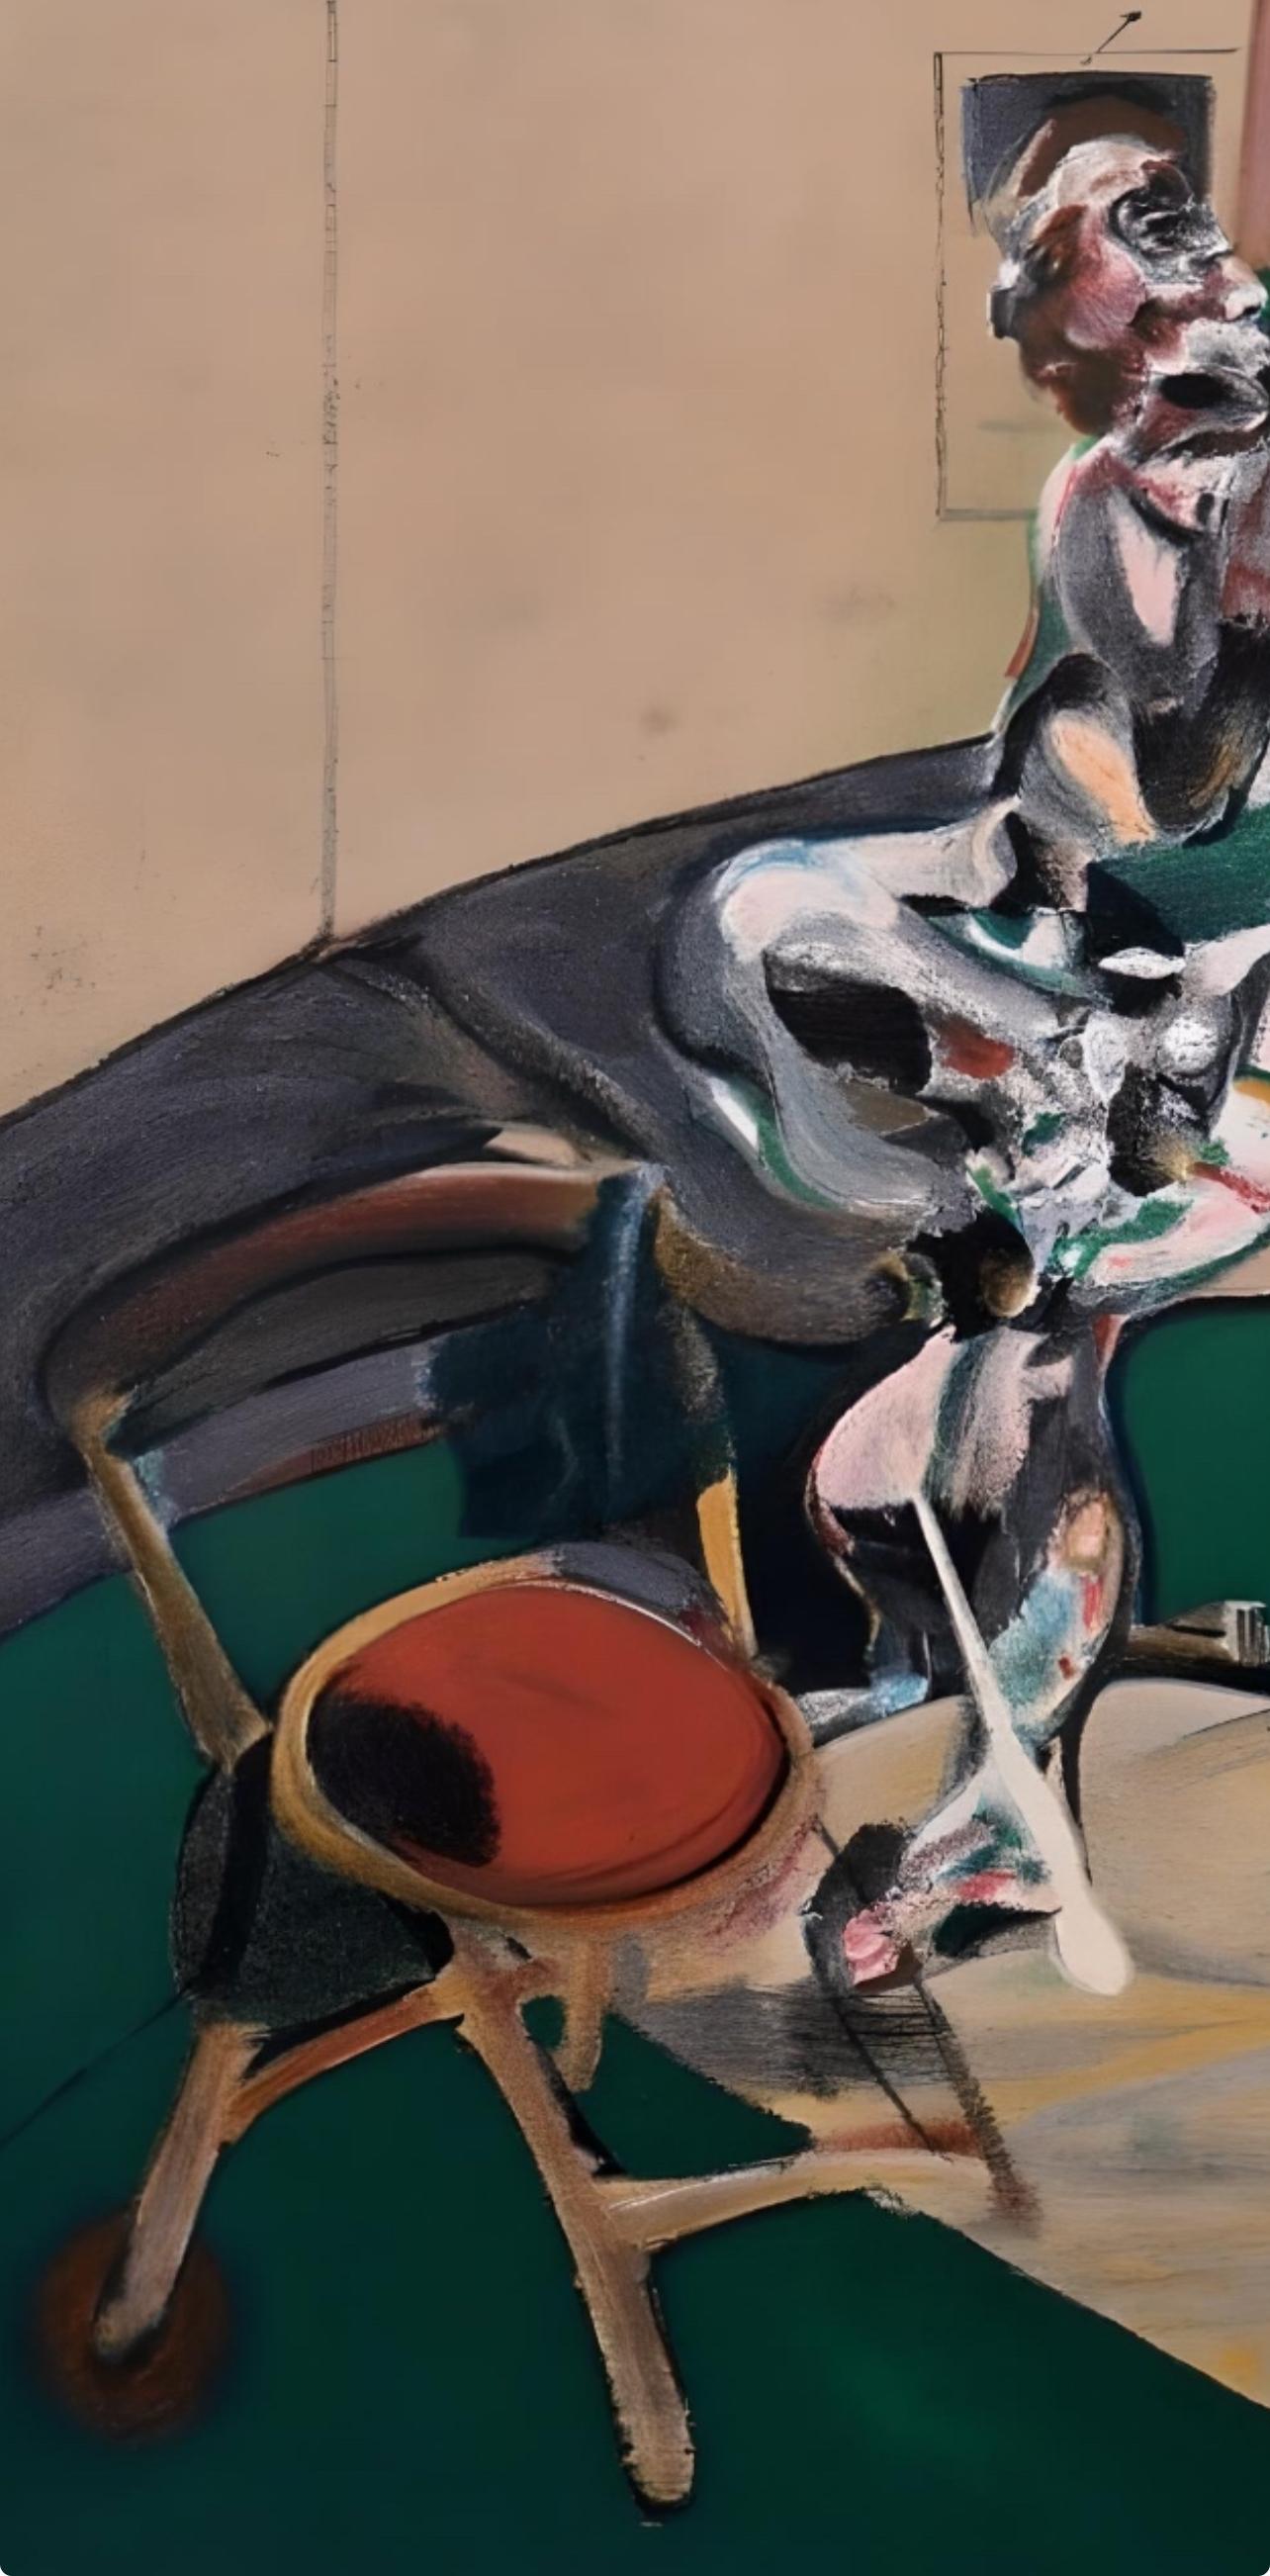 francis bacon portrait of george dyer crouching